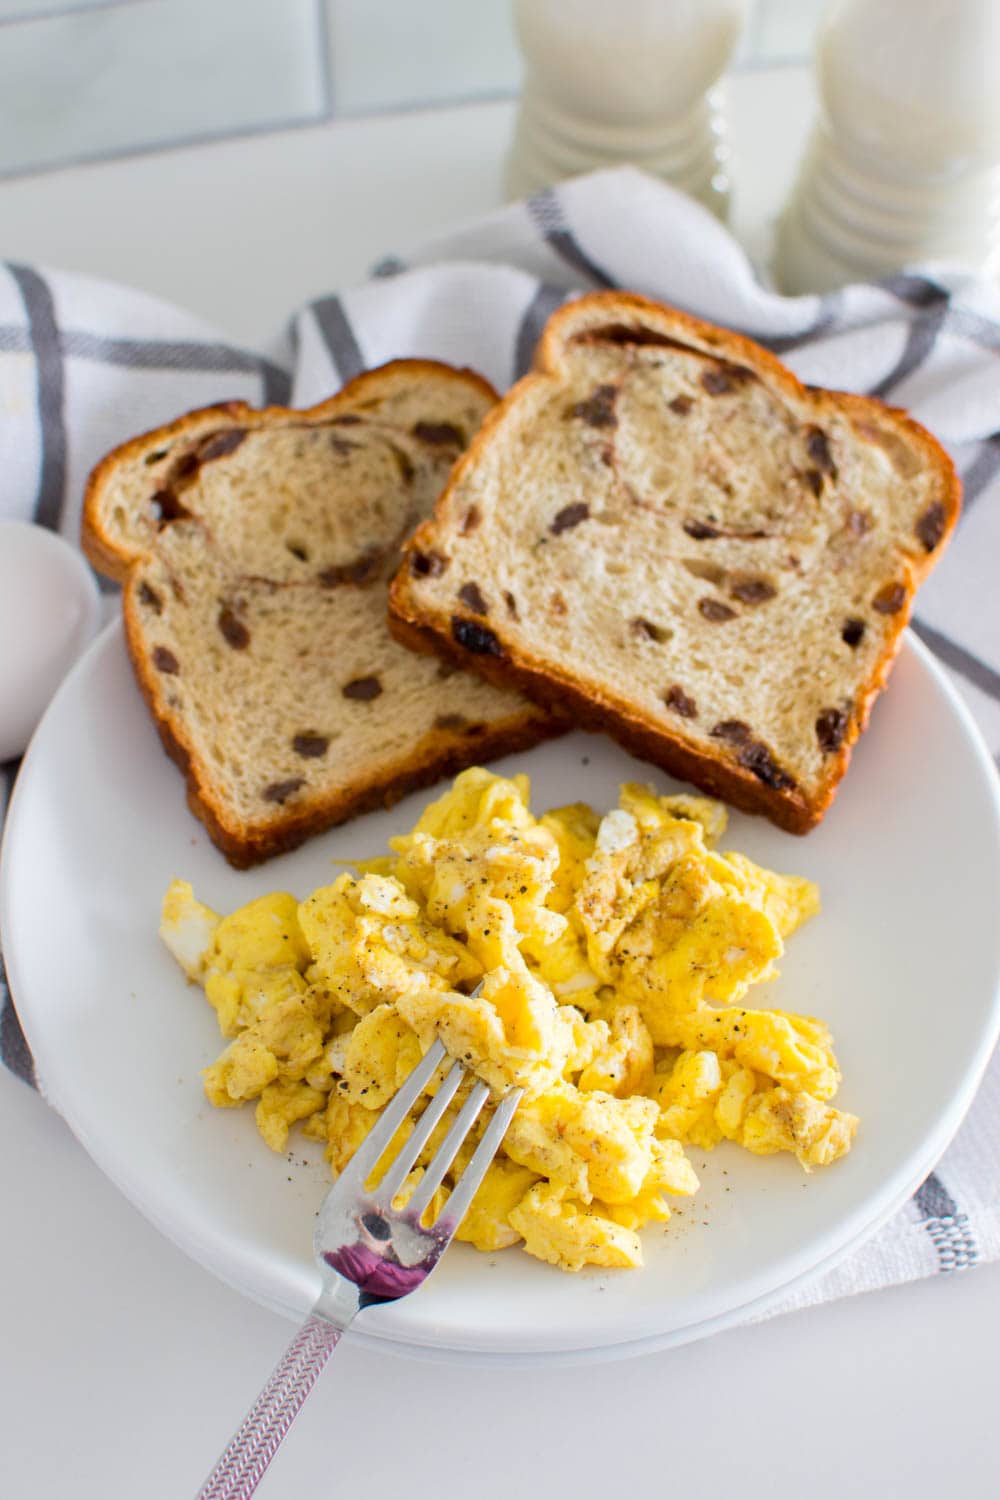 Aerial view of scrambled eggs, homemade and accompanied by raisin bread